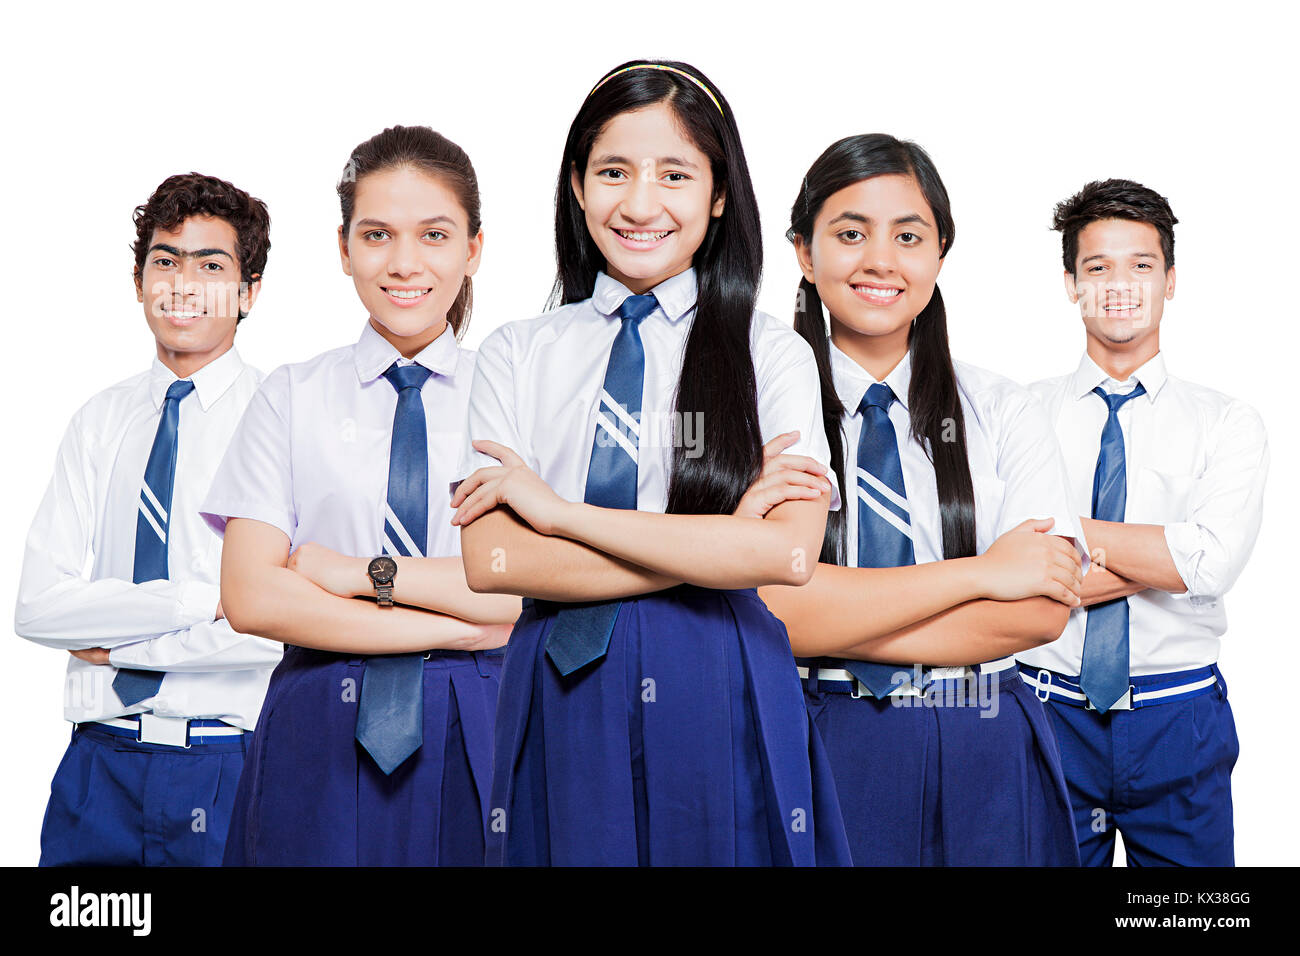 Indian Group Teenagers School Students Friends Arms Crossed Standing Together Stock Photo